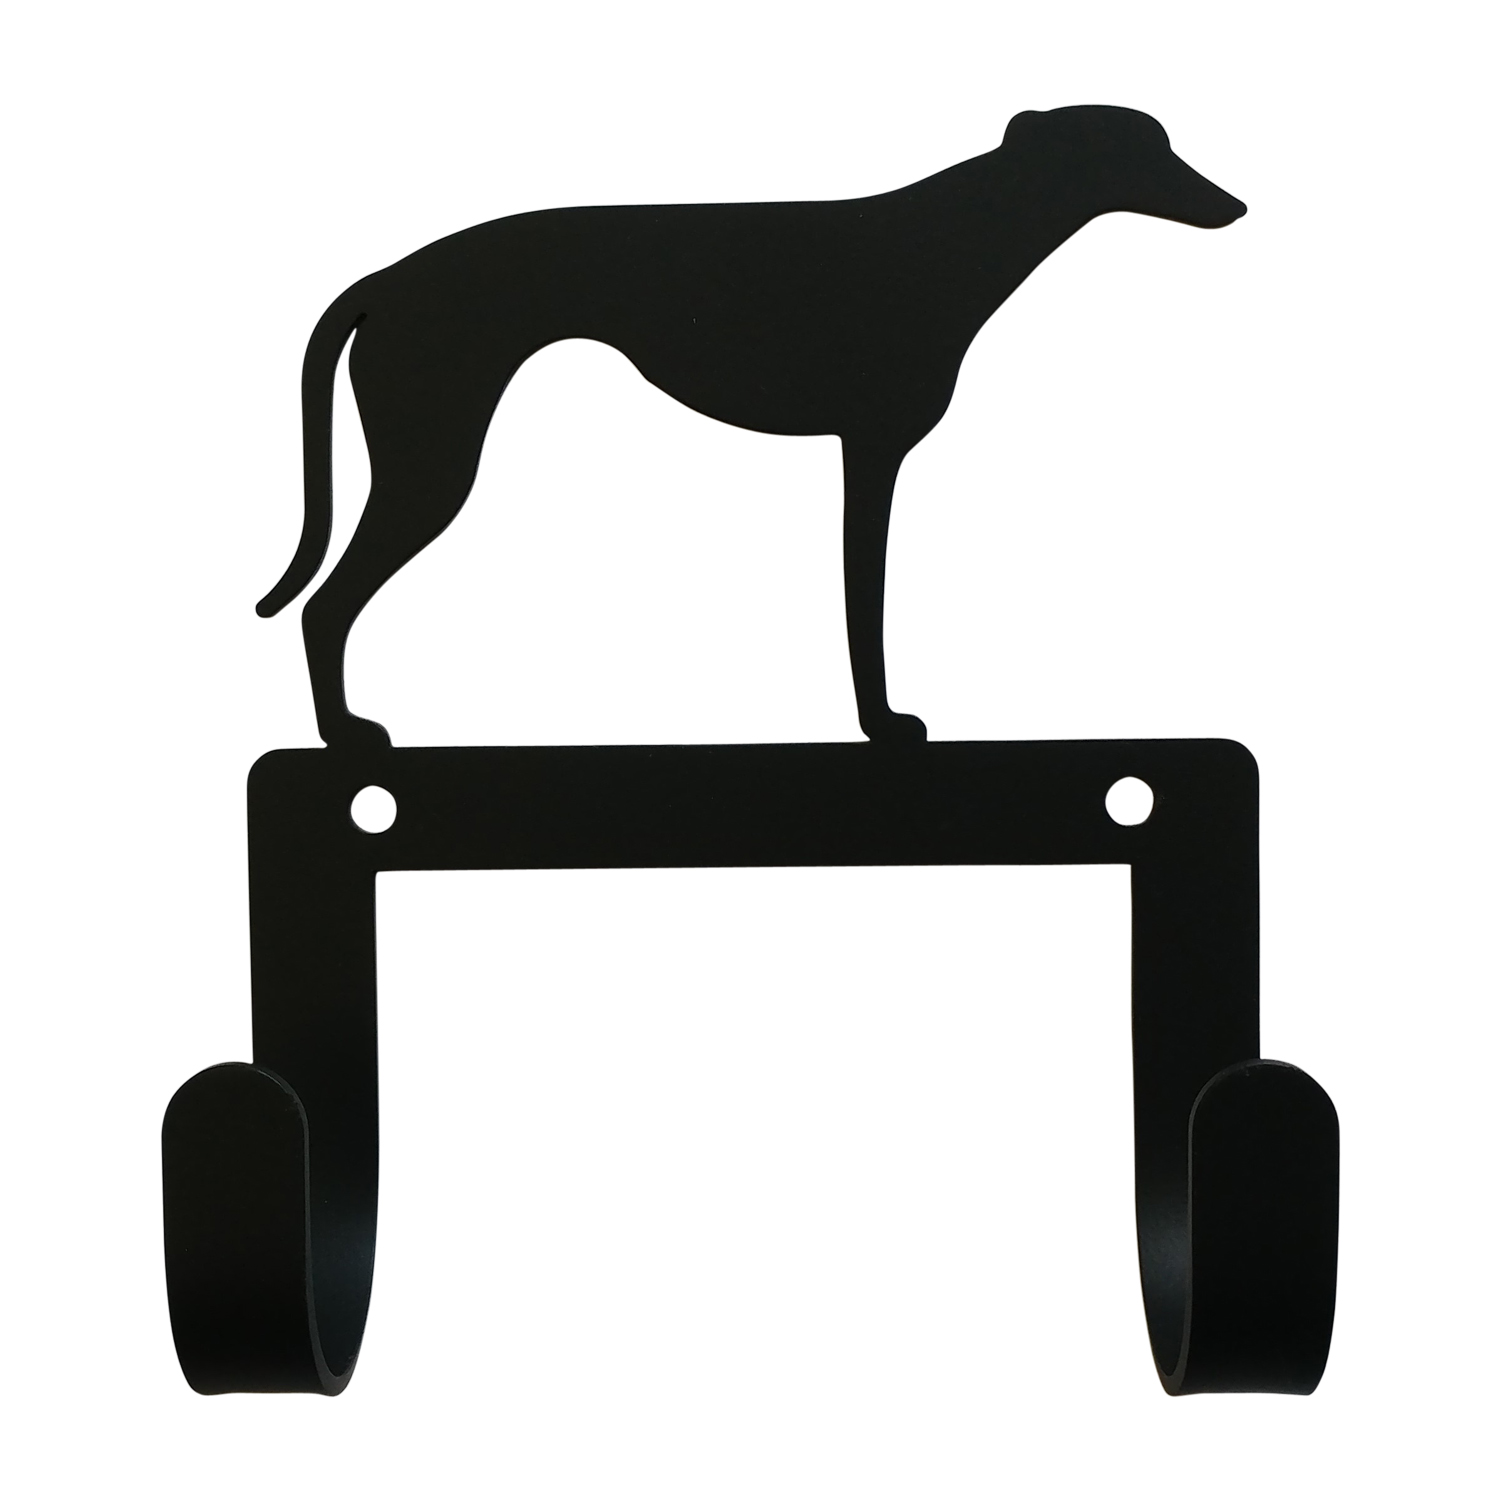 NEW - Greyhound - Leash and Collar Wall Hook